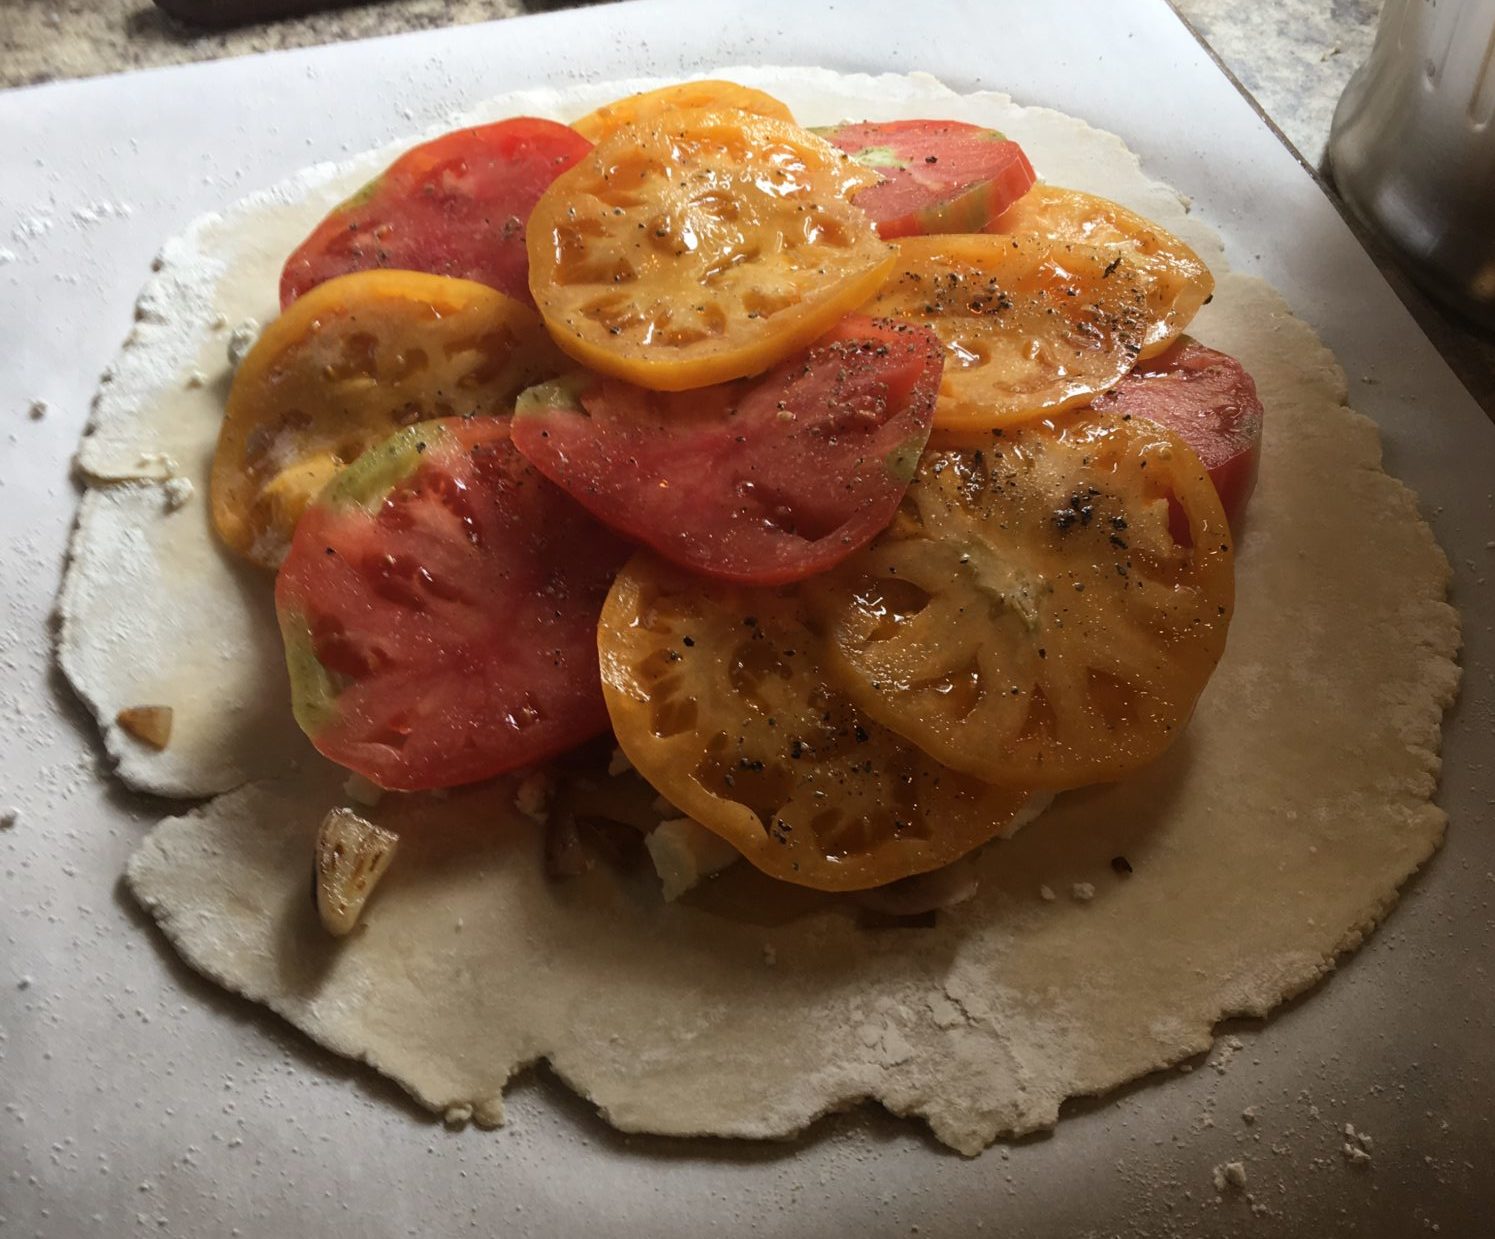 red and yellow tomato slices on a pastry